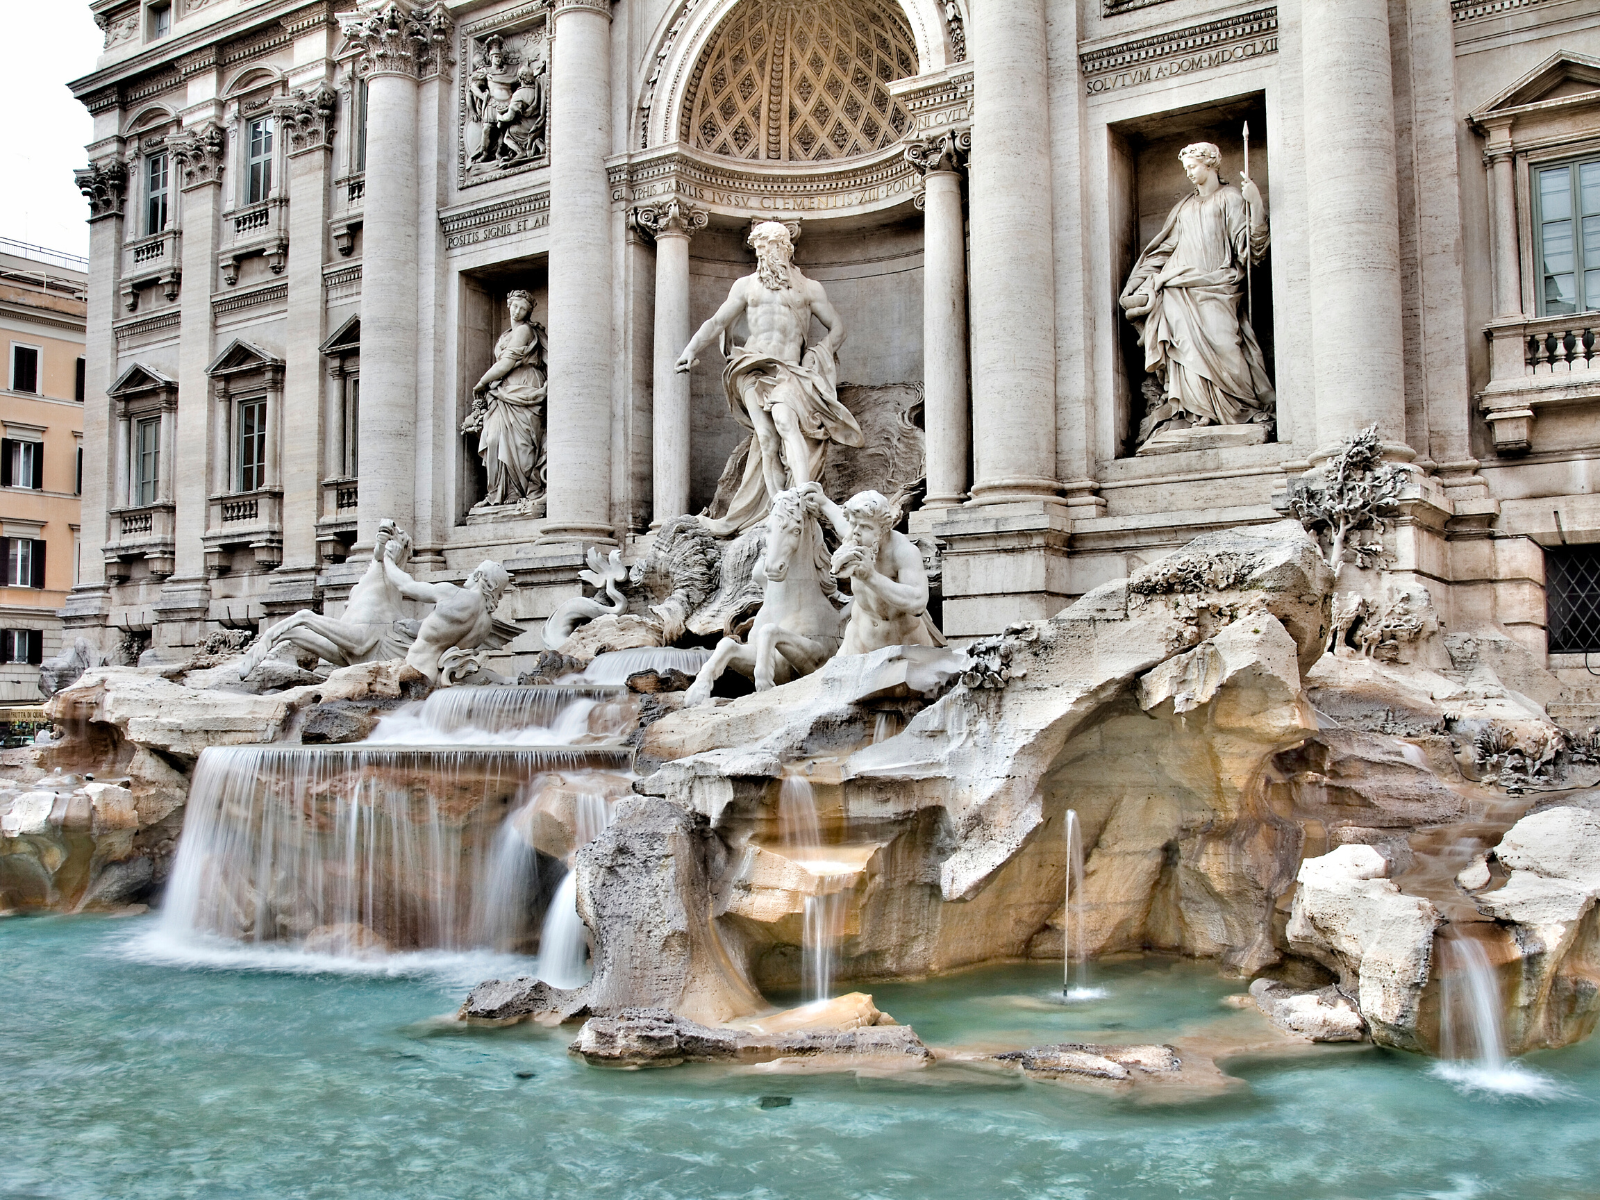 The sculptures of the Trevi fountain.